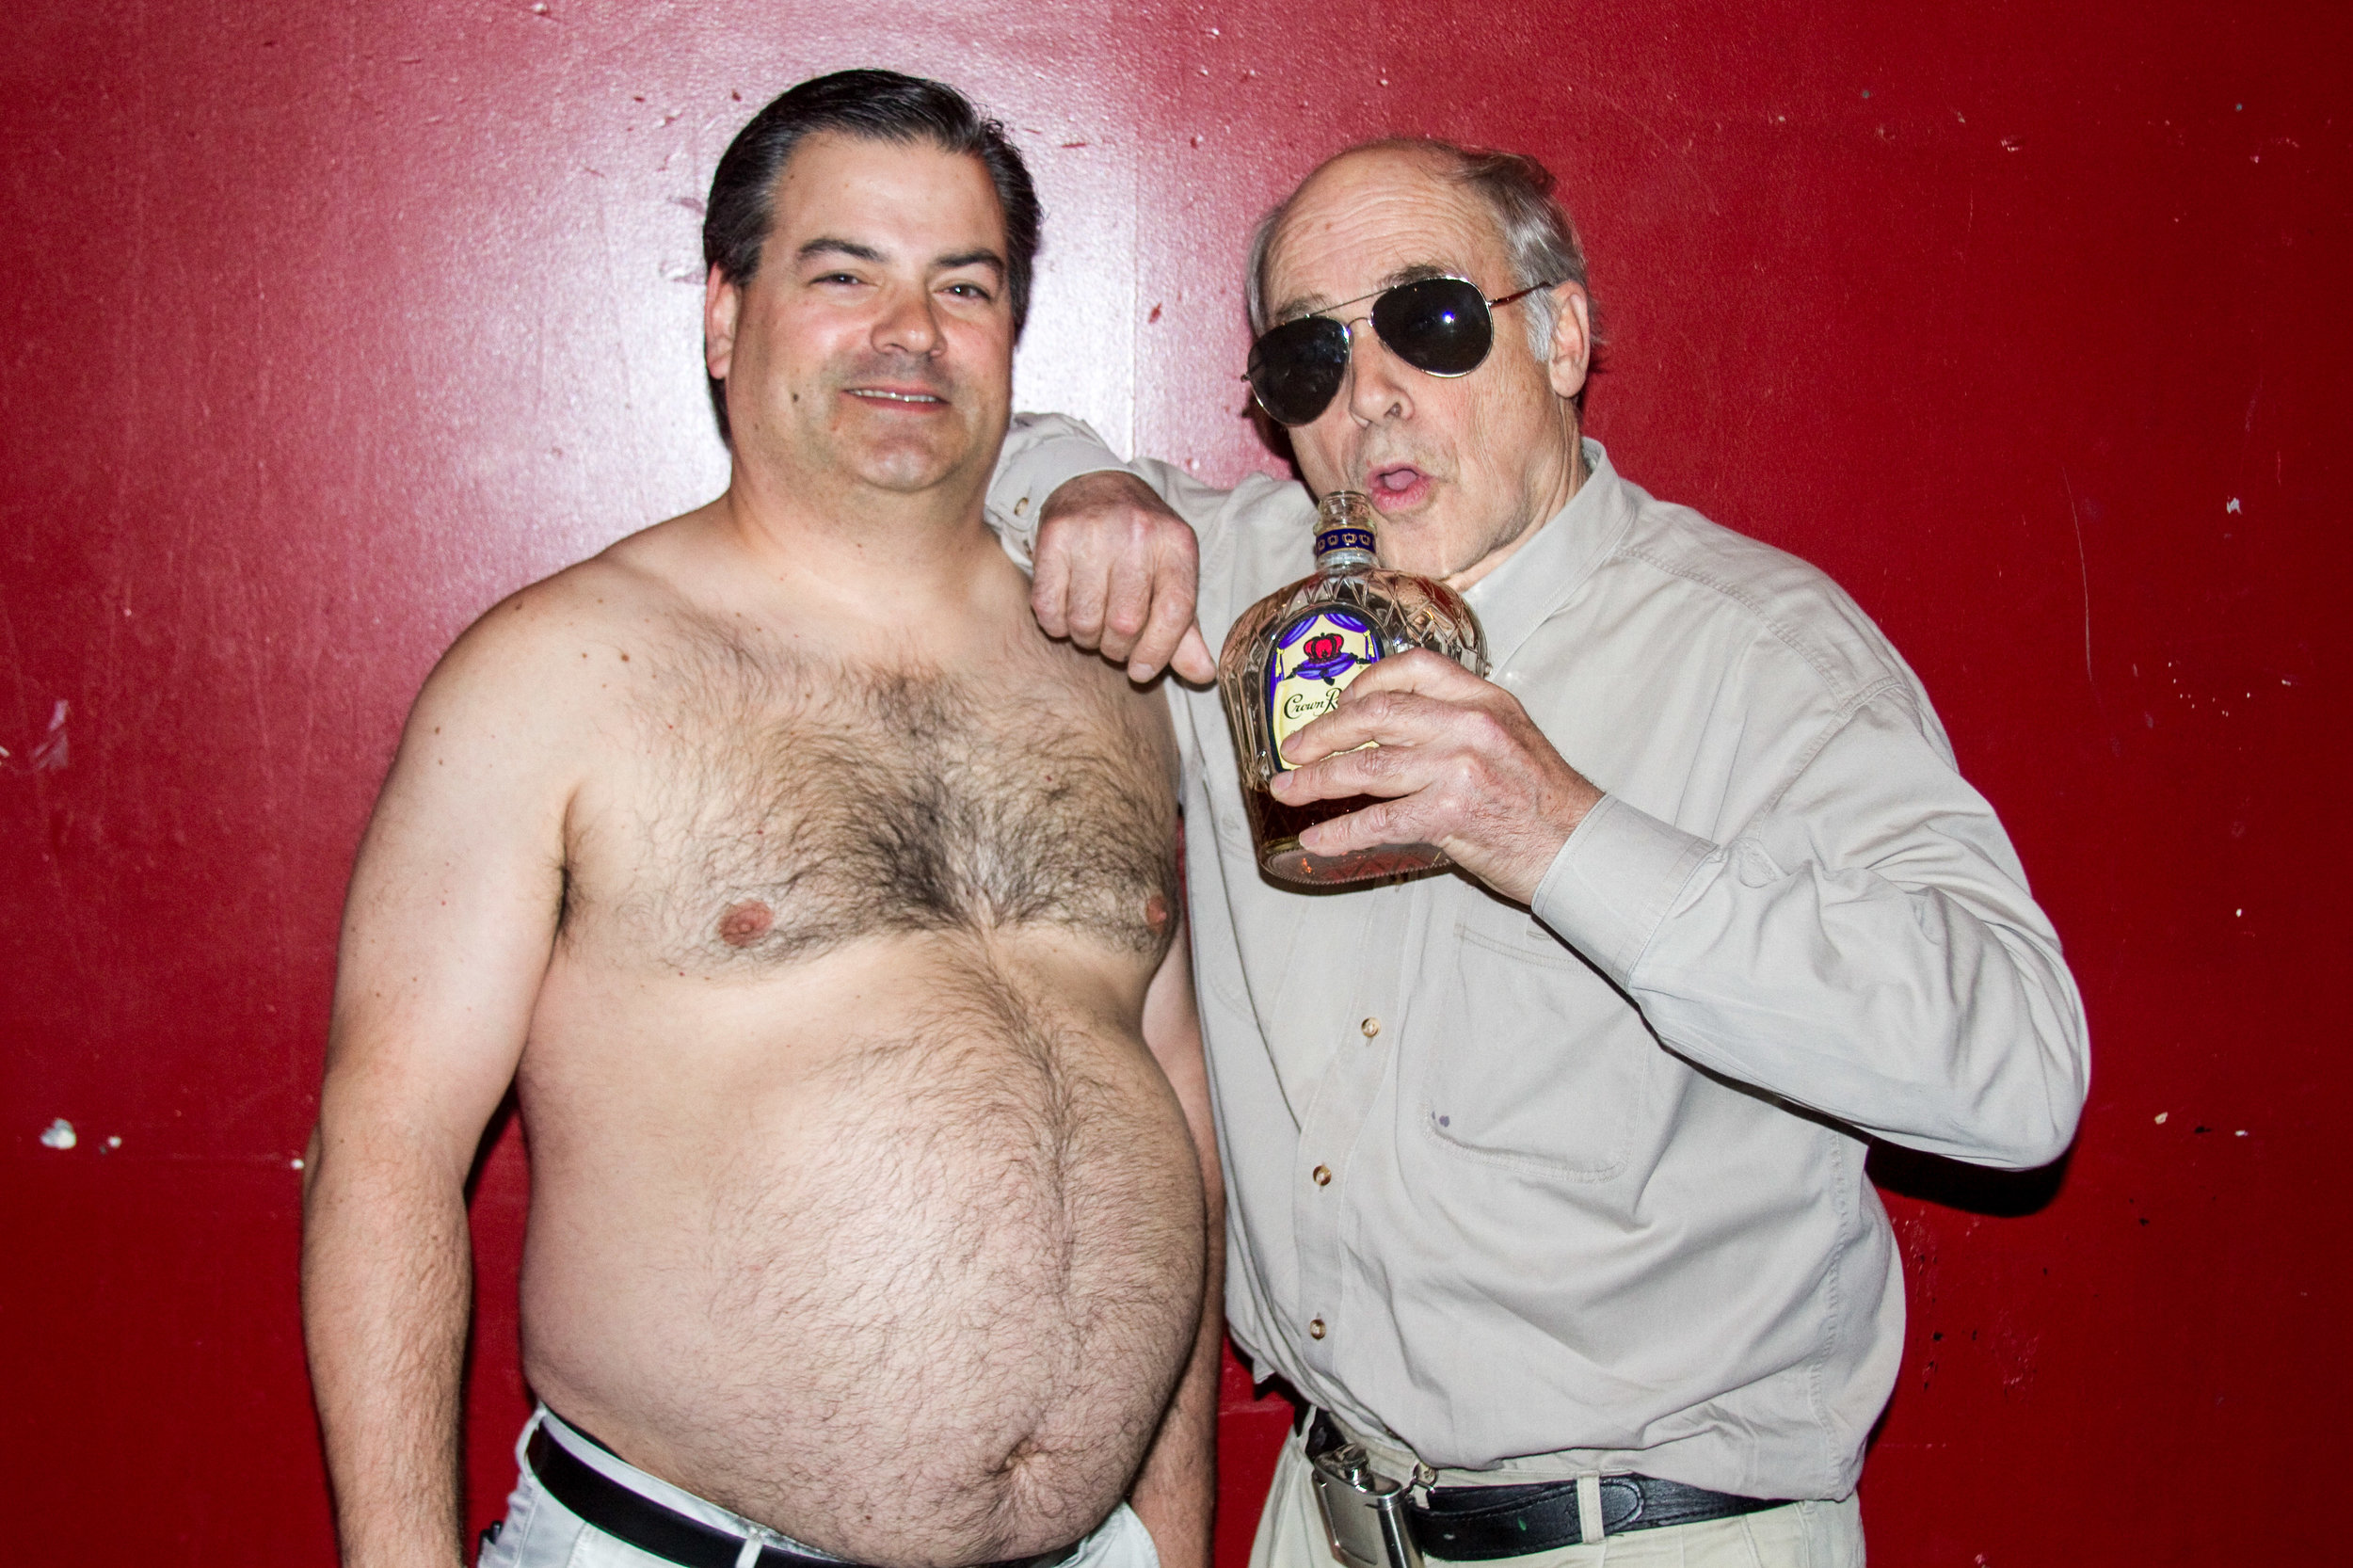  Though his character, Jim Lahey,&nbsp;often drank to a stupor in the show, John rarely drank alcohol.&nbsp;He said that when fans would ask him to drink with them, he'd often pretend to drink, or distract them with a laugh long enough for him to set